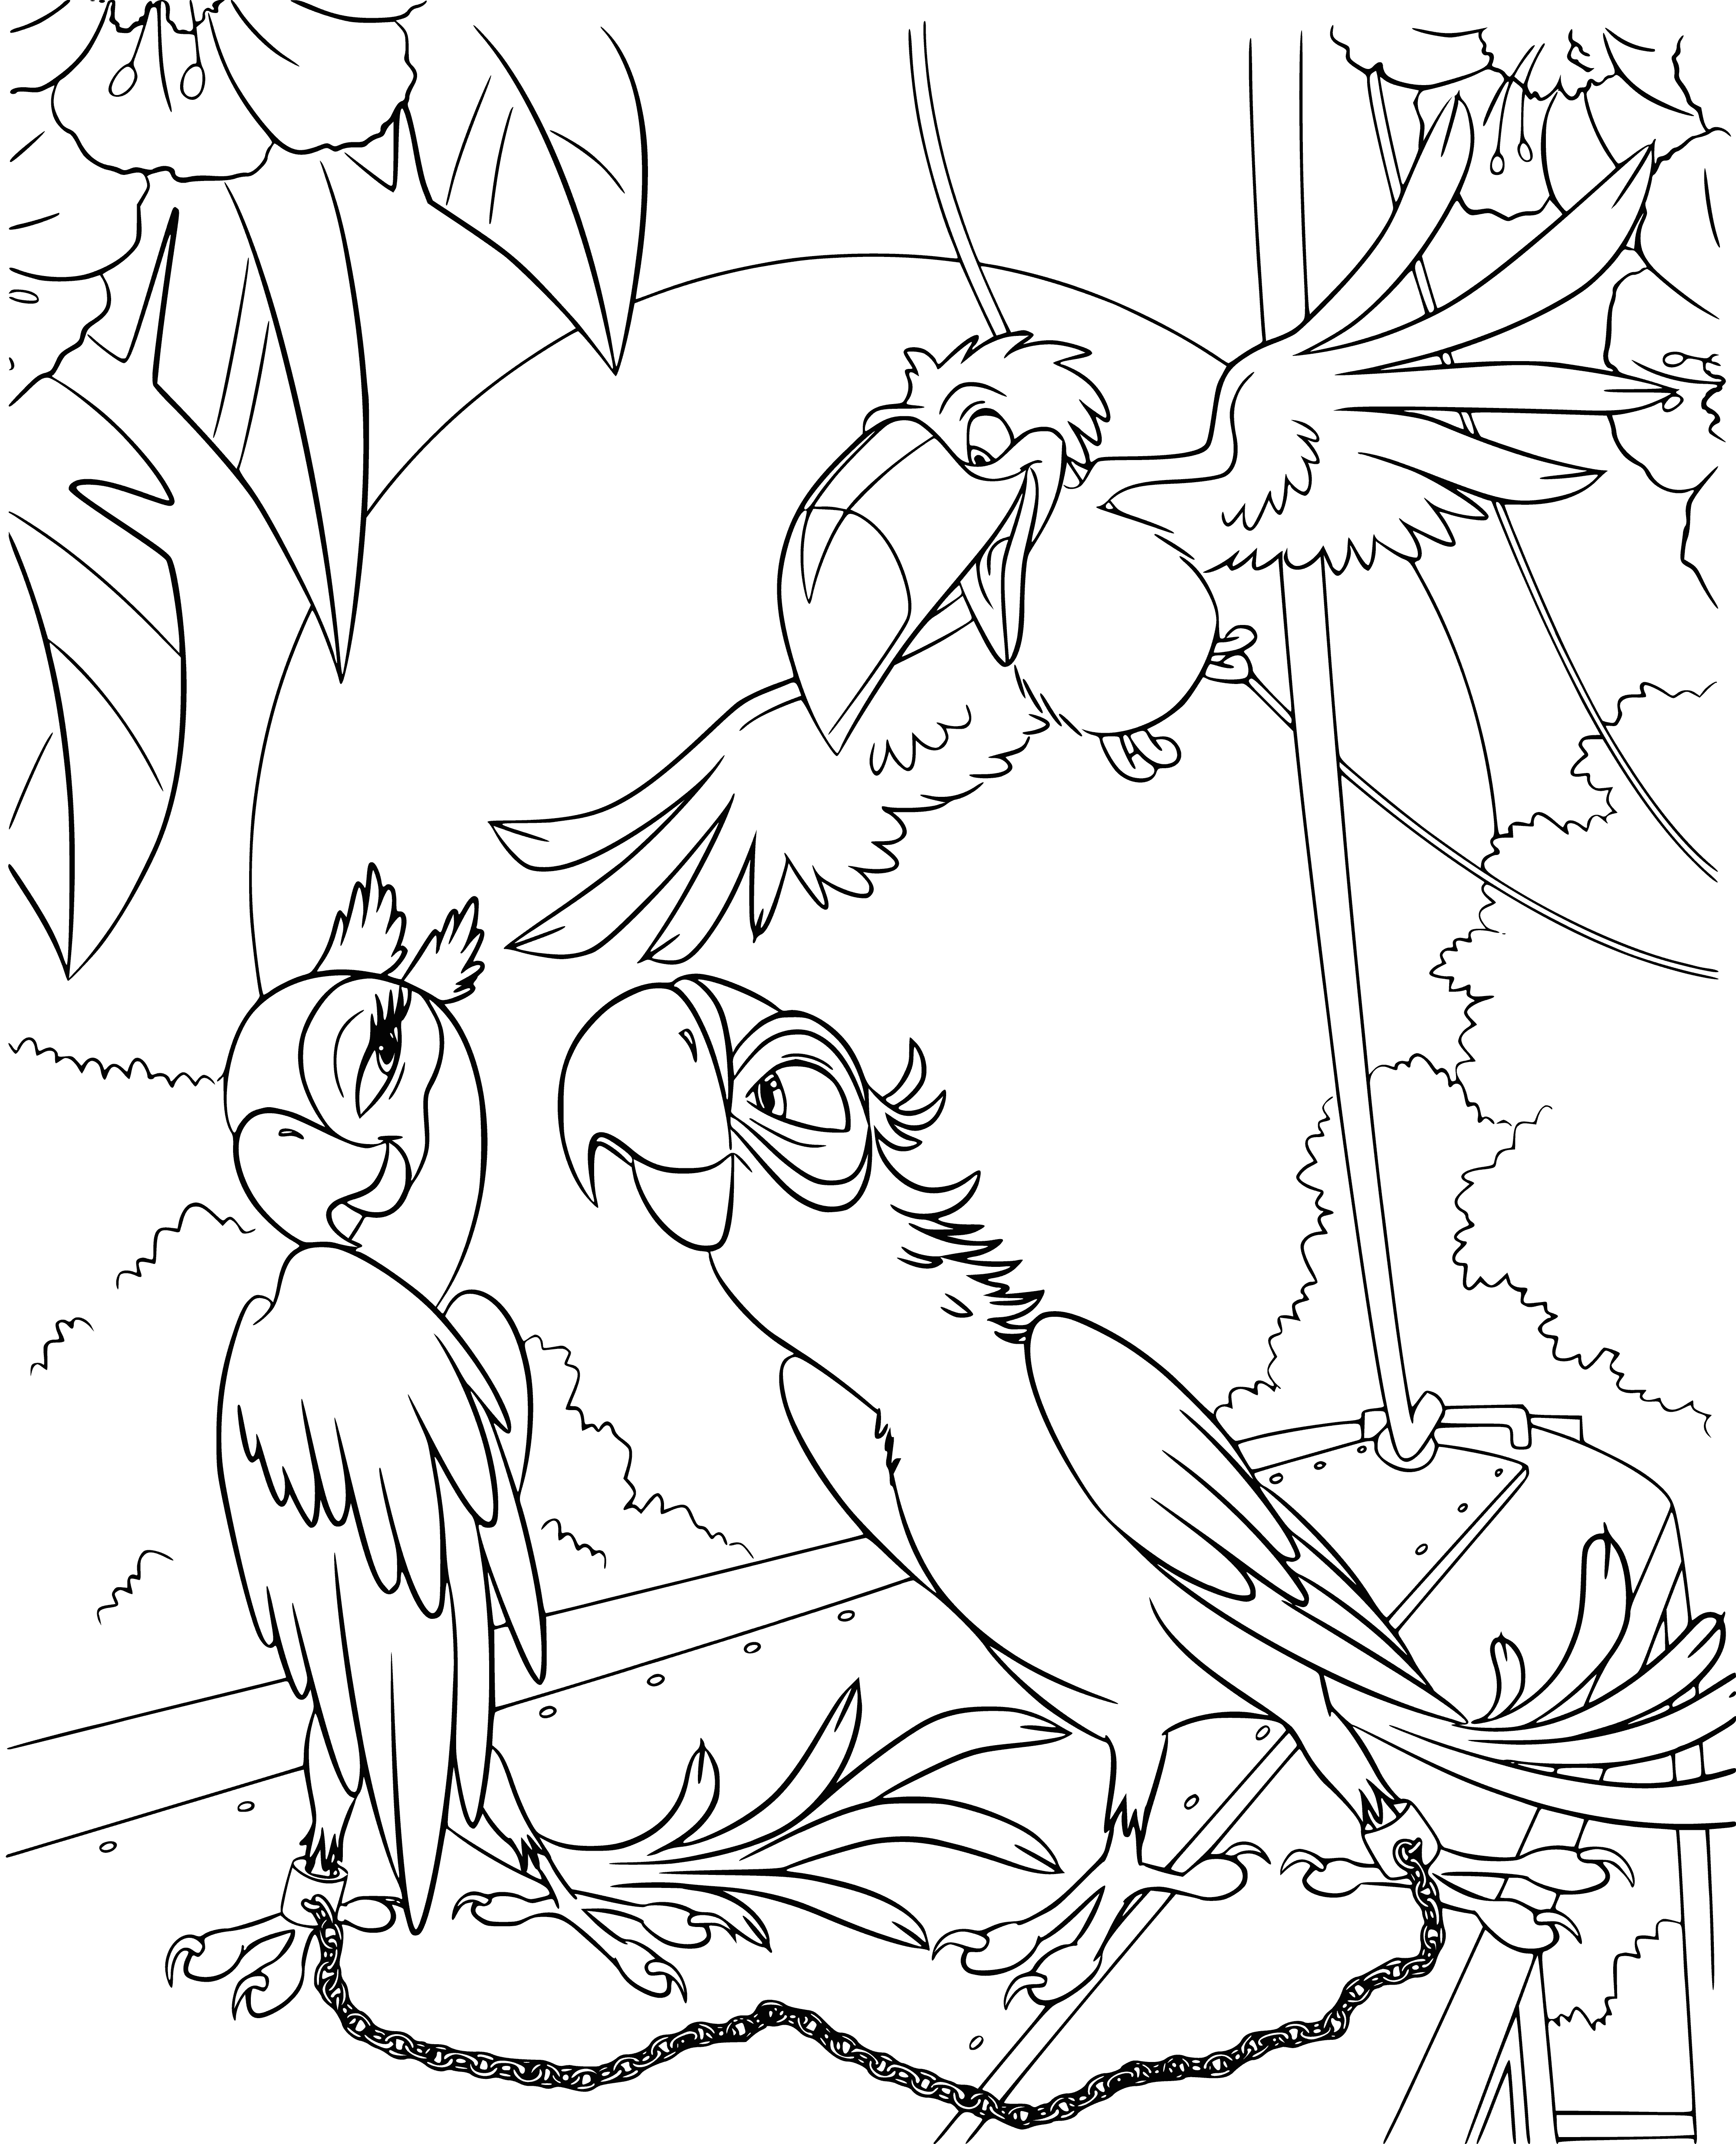 Darling and Pearl coloring page